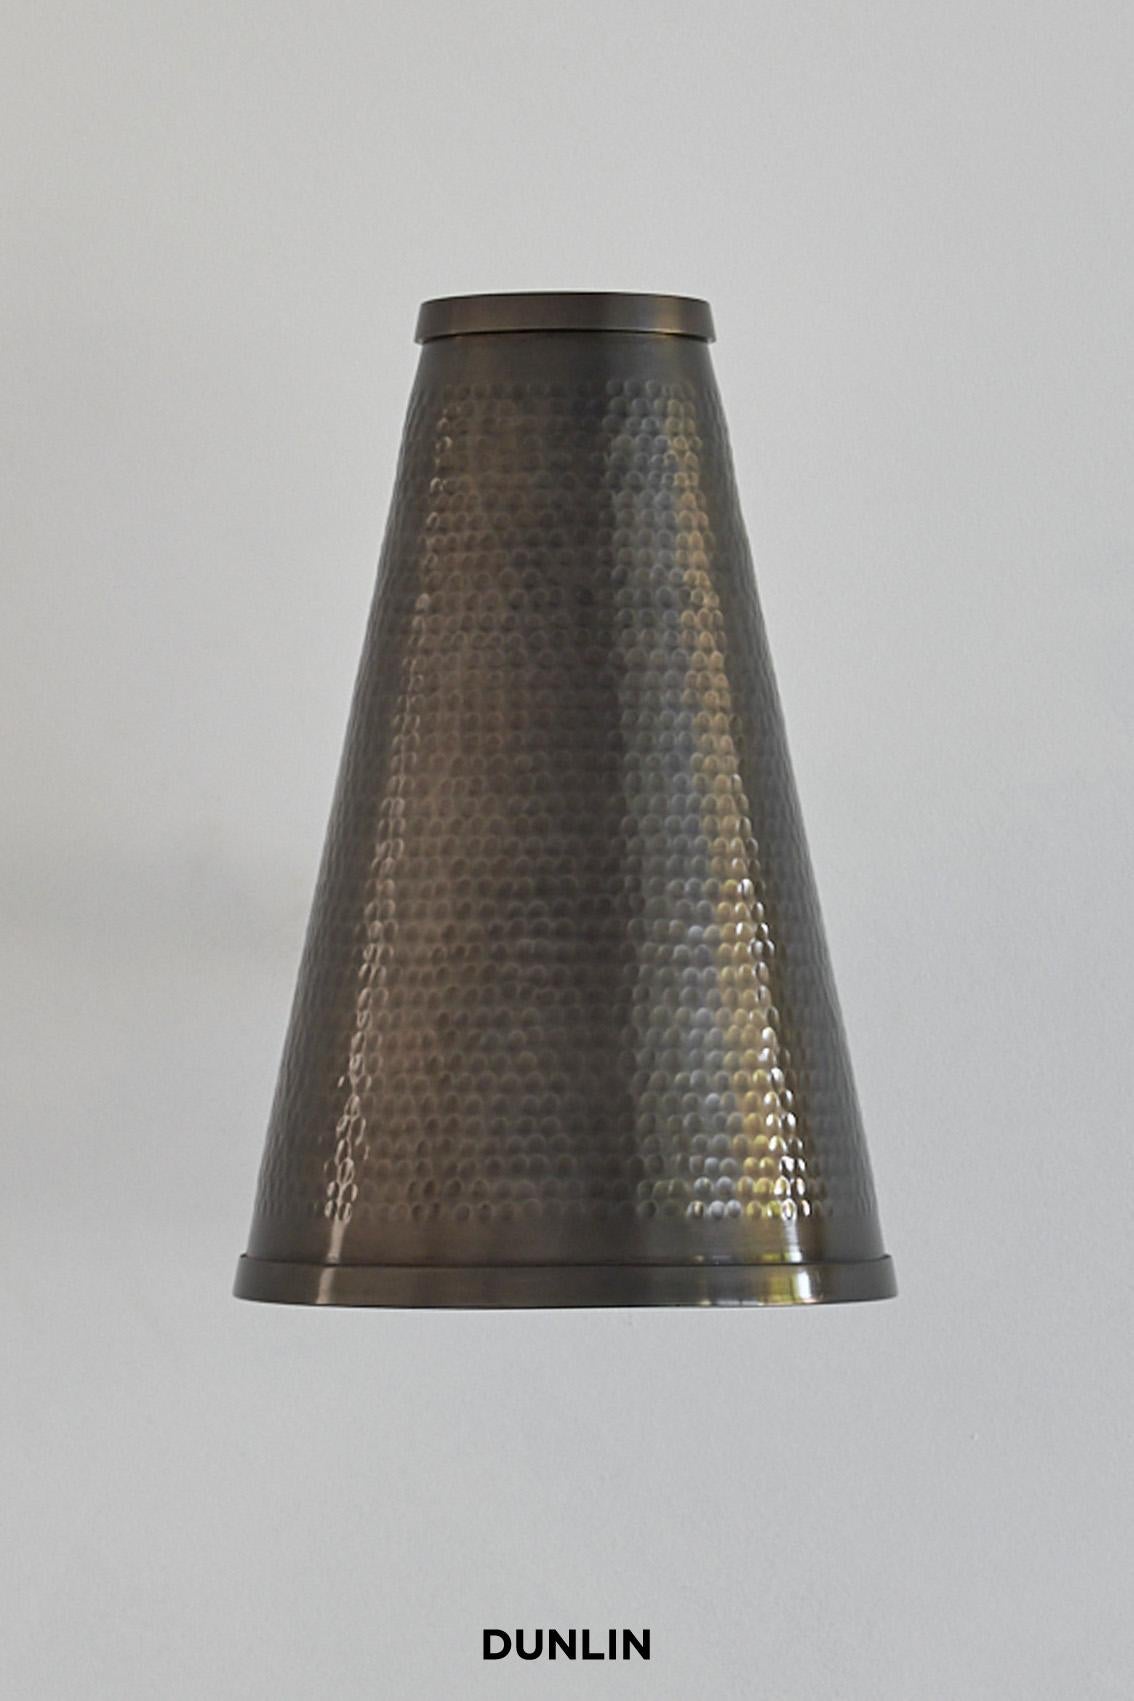 Contemporary Callot Hammered Pendant Light, DUNLIN For Sale